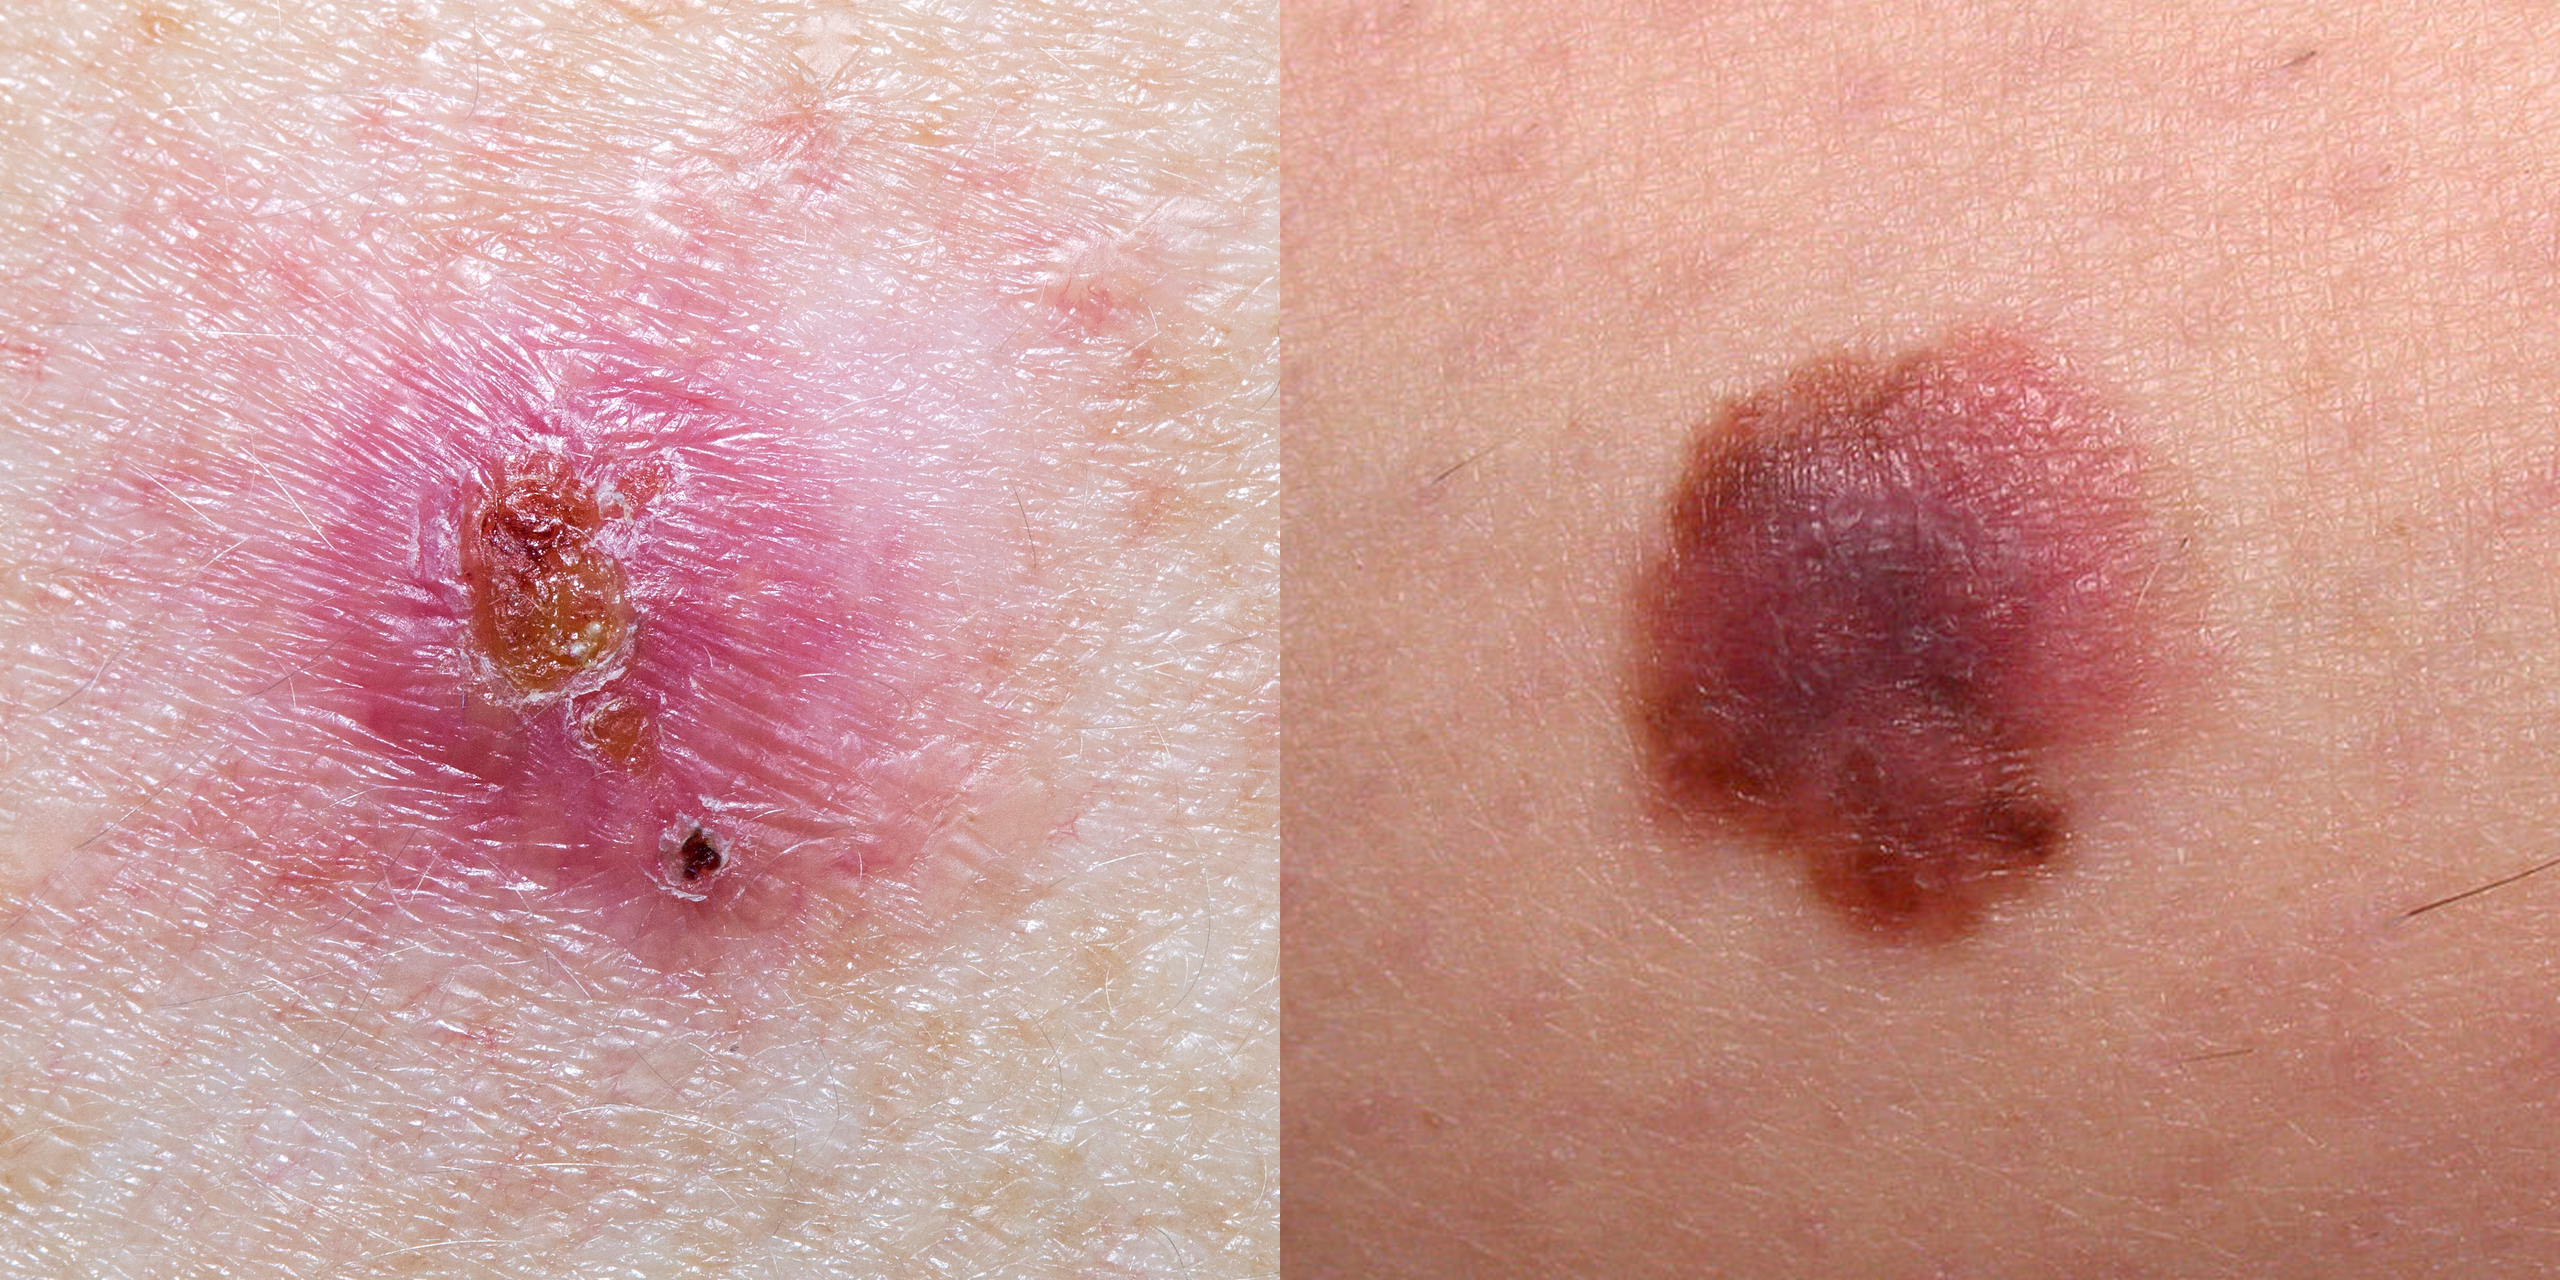 Skin Cancer Pictures - 5 Types of Skin Cancer to